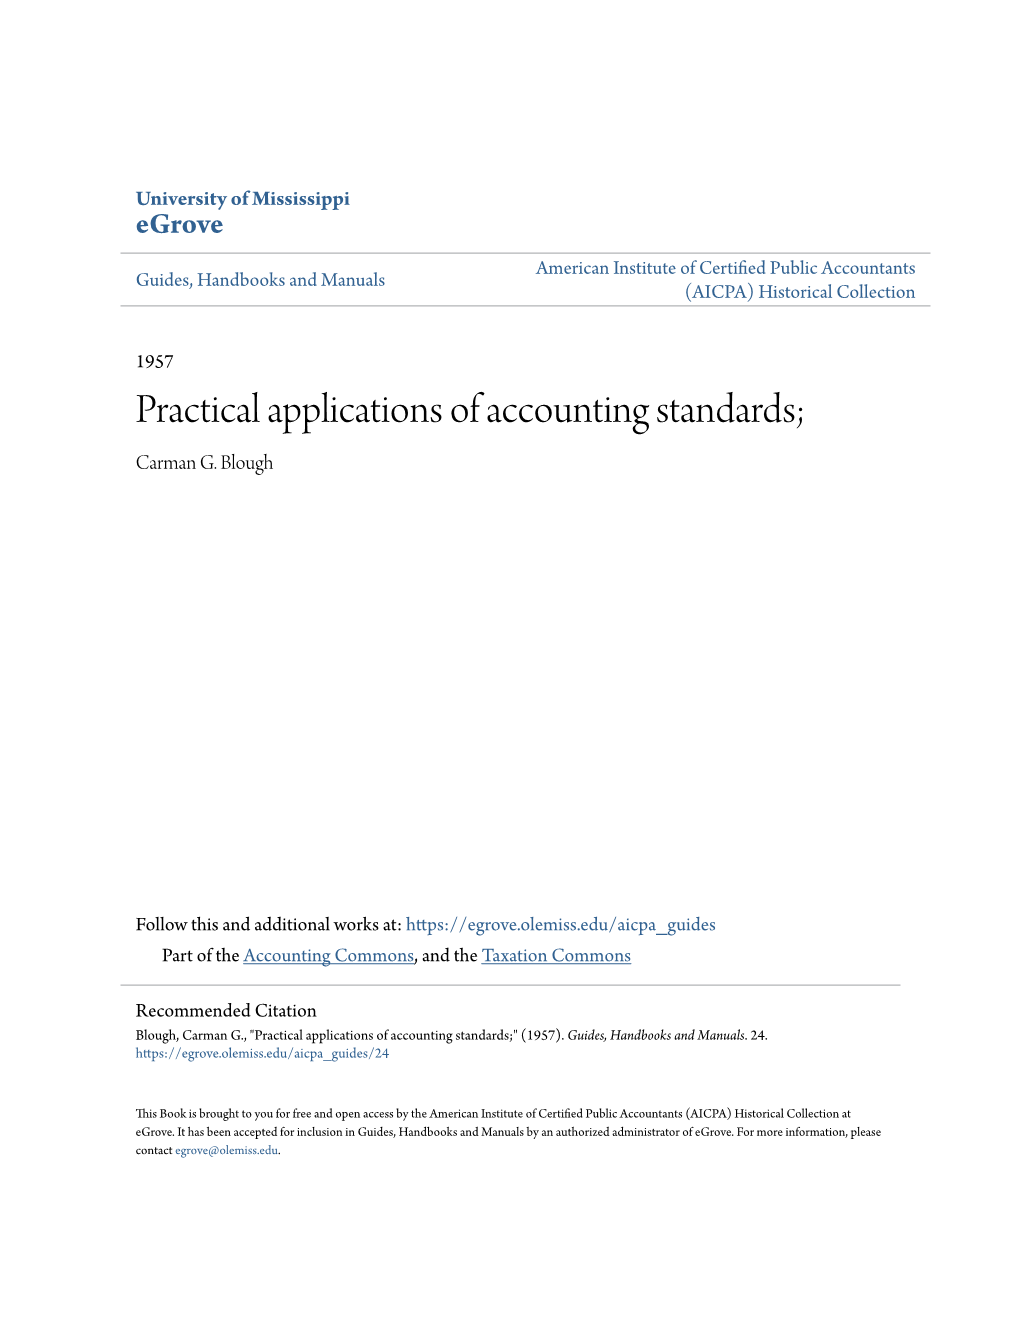 Practical Applications of Accounting Standards; Carman G